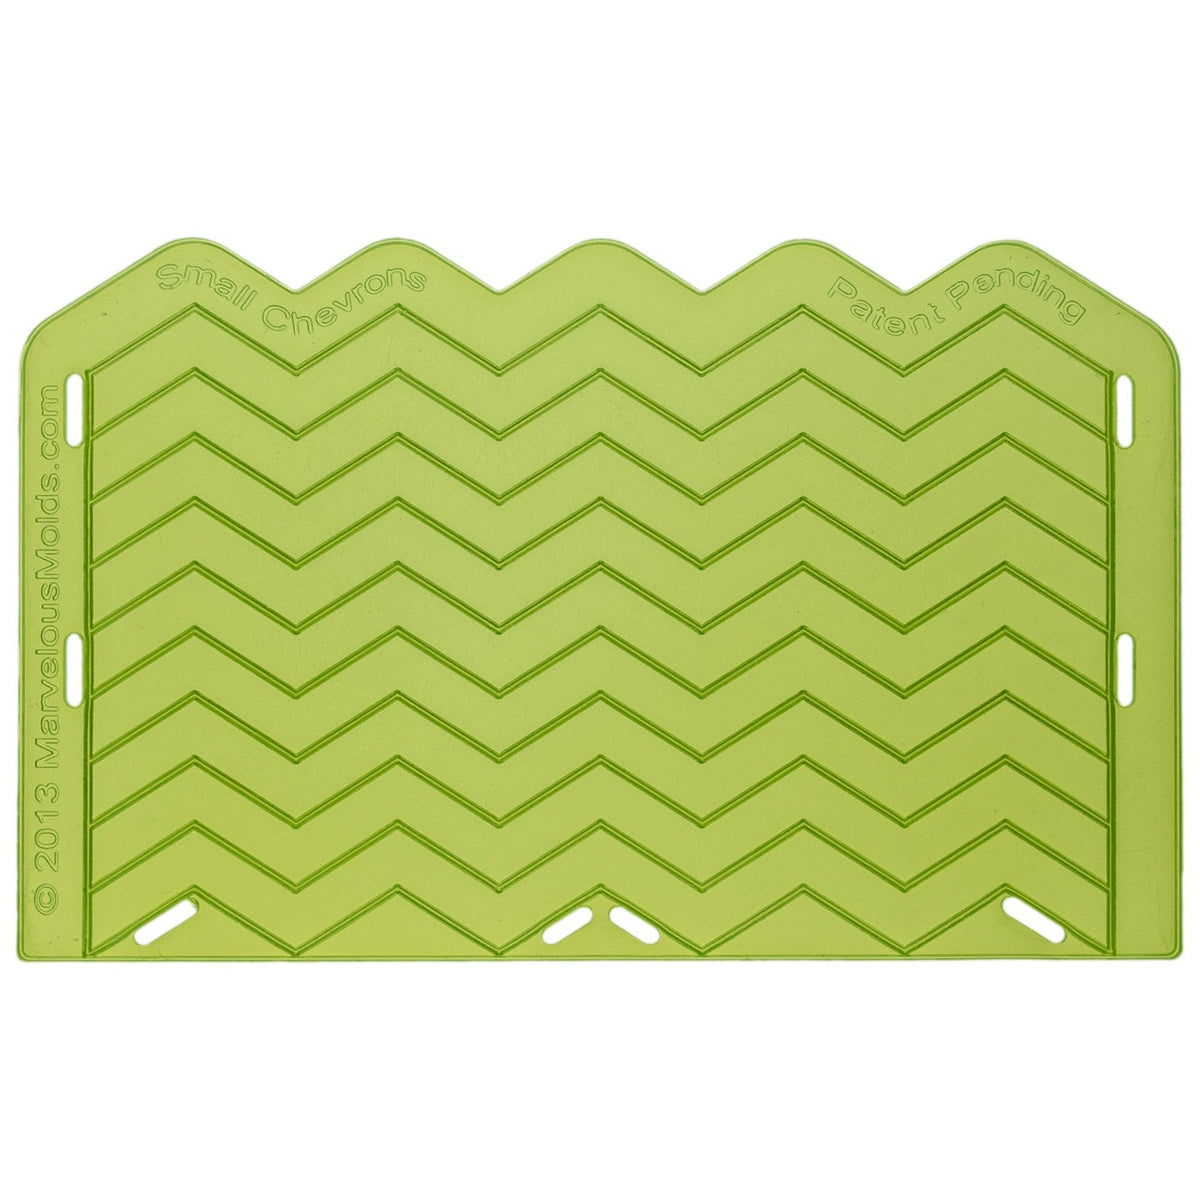 Small Chevron Silicone Onlay Mat for Ceramics or Pottery by Marvelous Molds